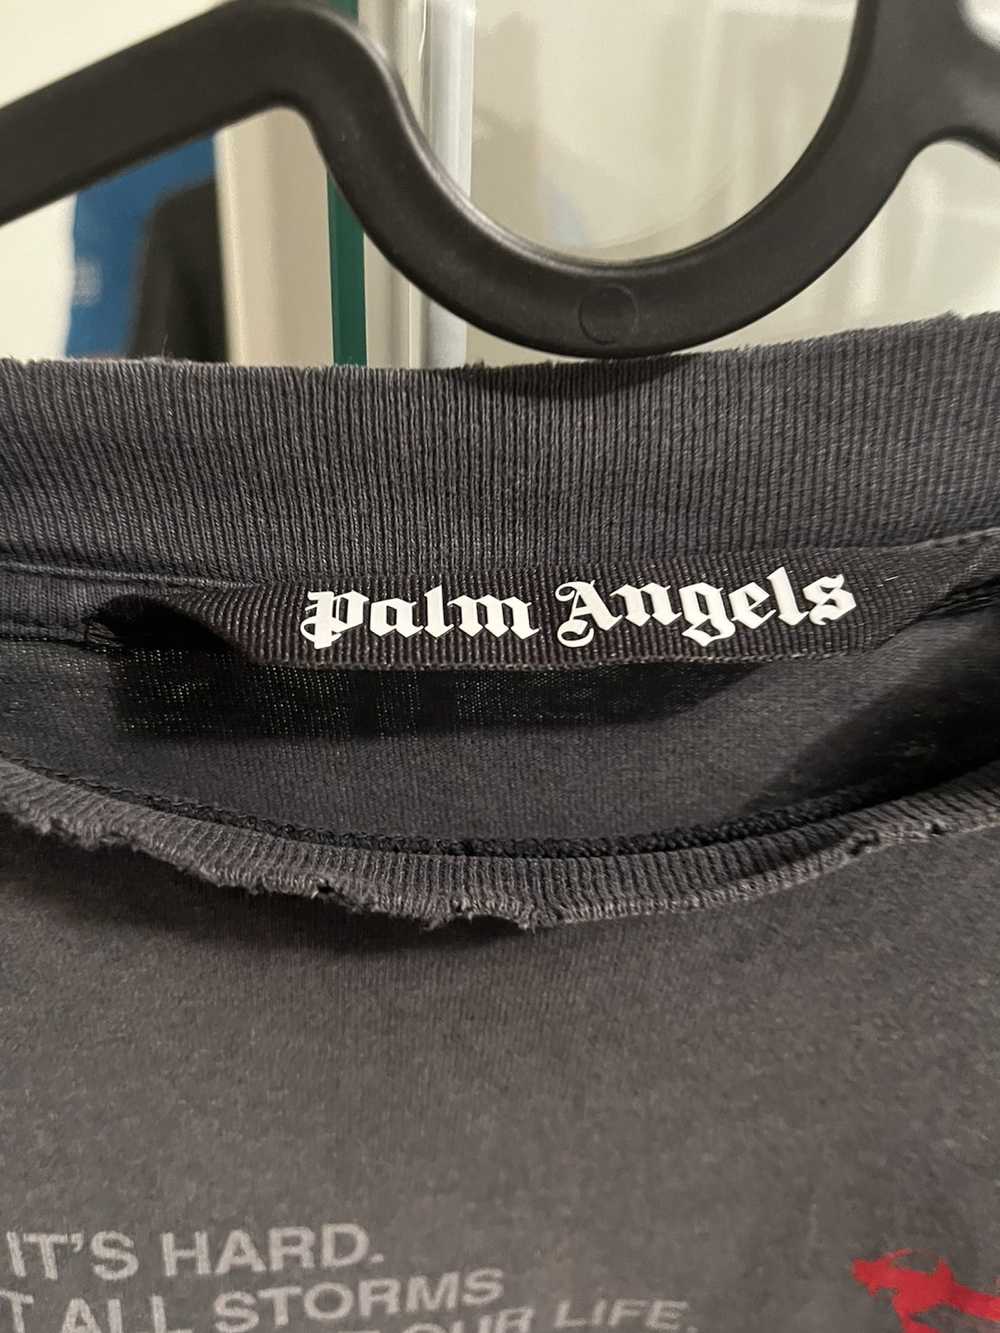 Palm Angels PALM ANGELS limited edition tee - image 2